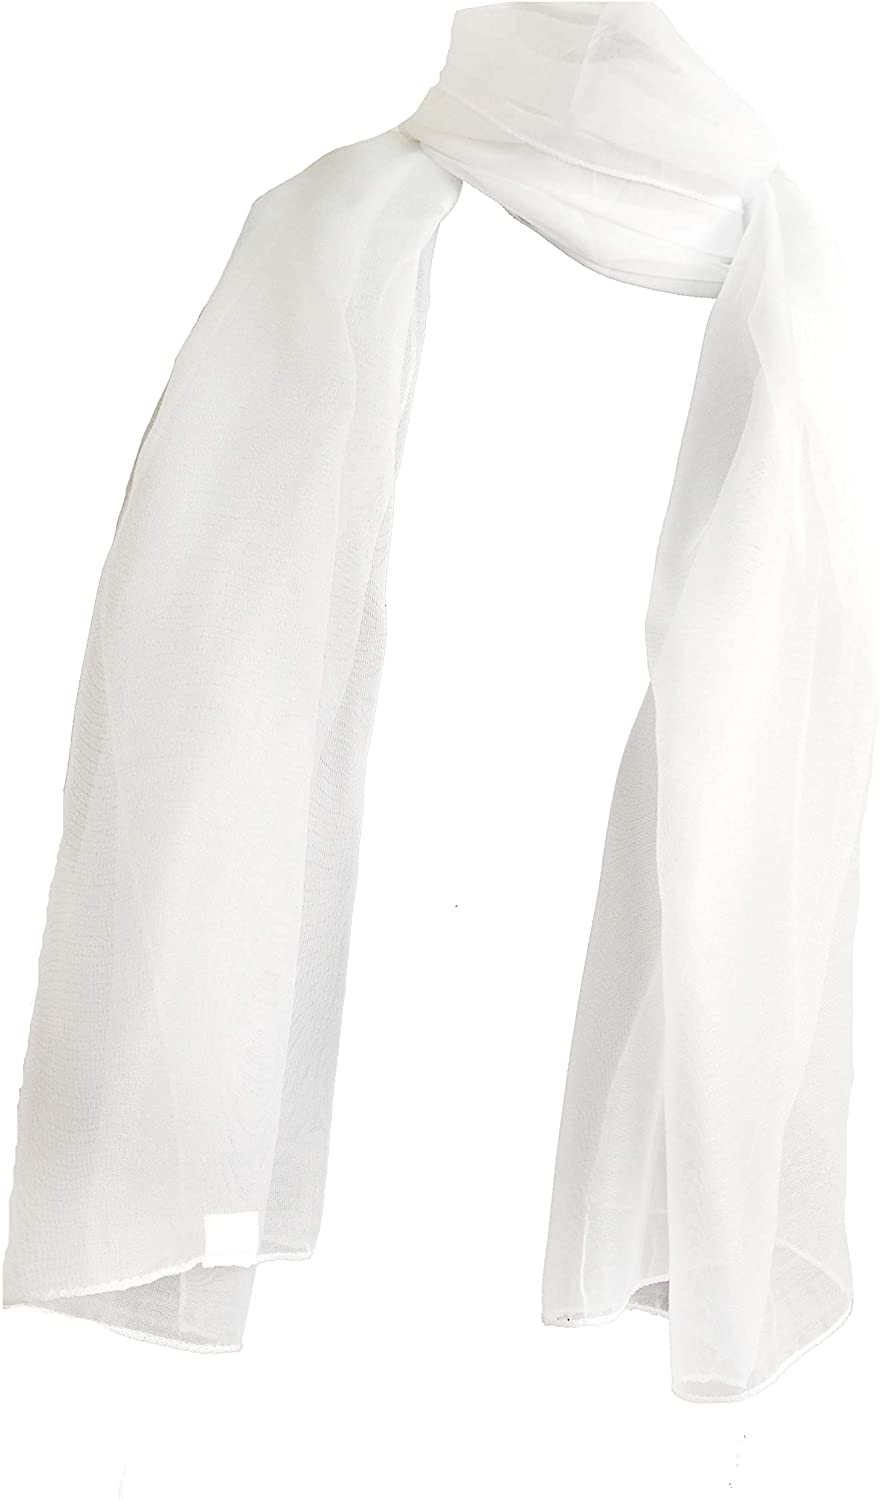 Plain White Chiffon Style Scarf Thin Pretty Scarf Great for Any Outfit Lovely Gift